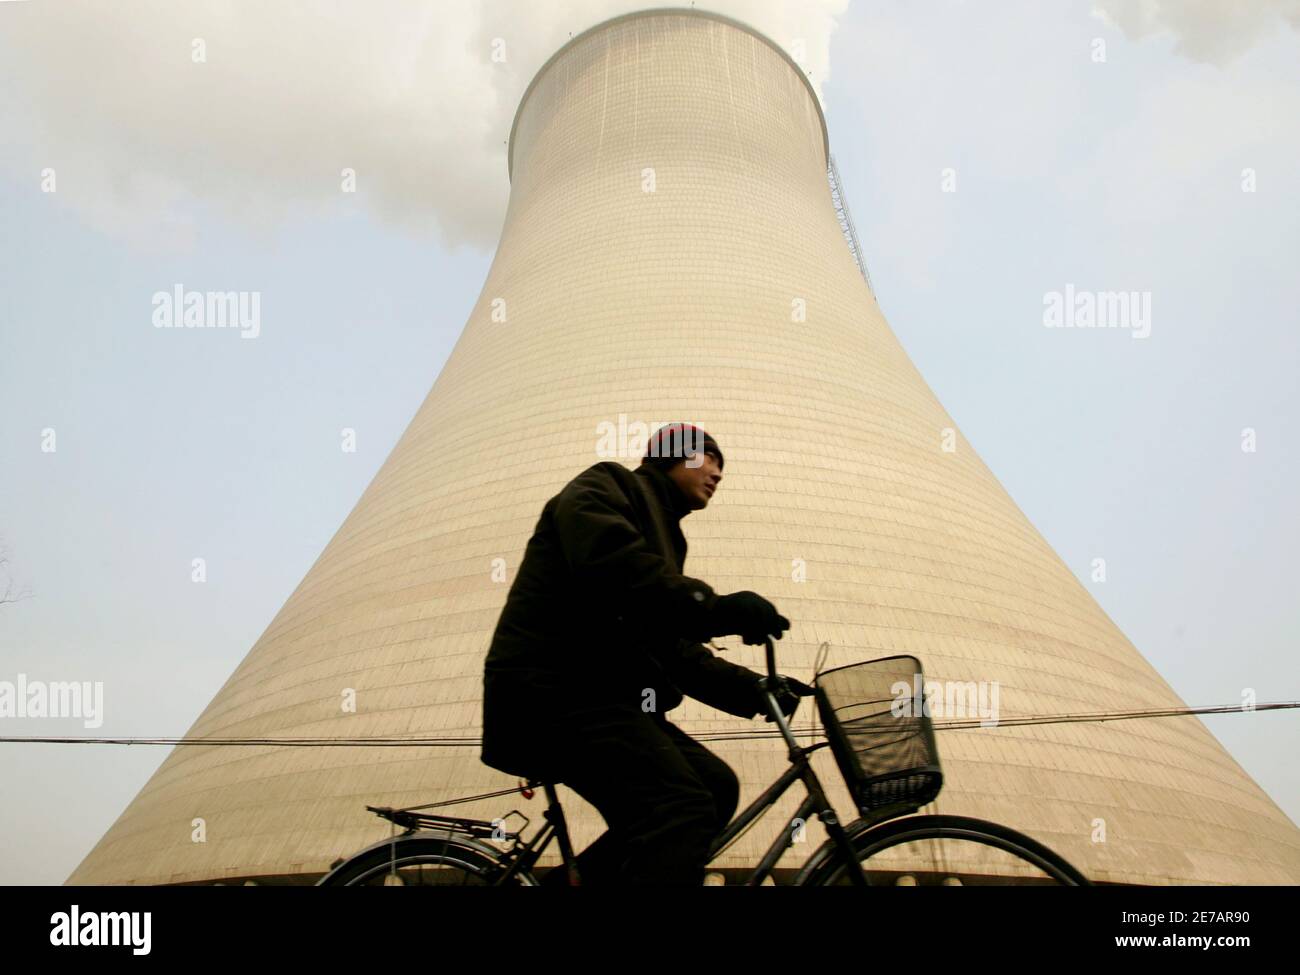 A Chinese man cycles past a coal-run power plant after an [explosion] in Tangshan in China's Hebei province December 9, 2005. [A gas explosion at a Chinese coal pit has killed at least 74 miners, state media said on Thursday, notching up another statistic in a grimly predictable series in the world's deadliest mining industry.] Stock Photo